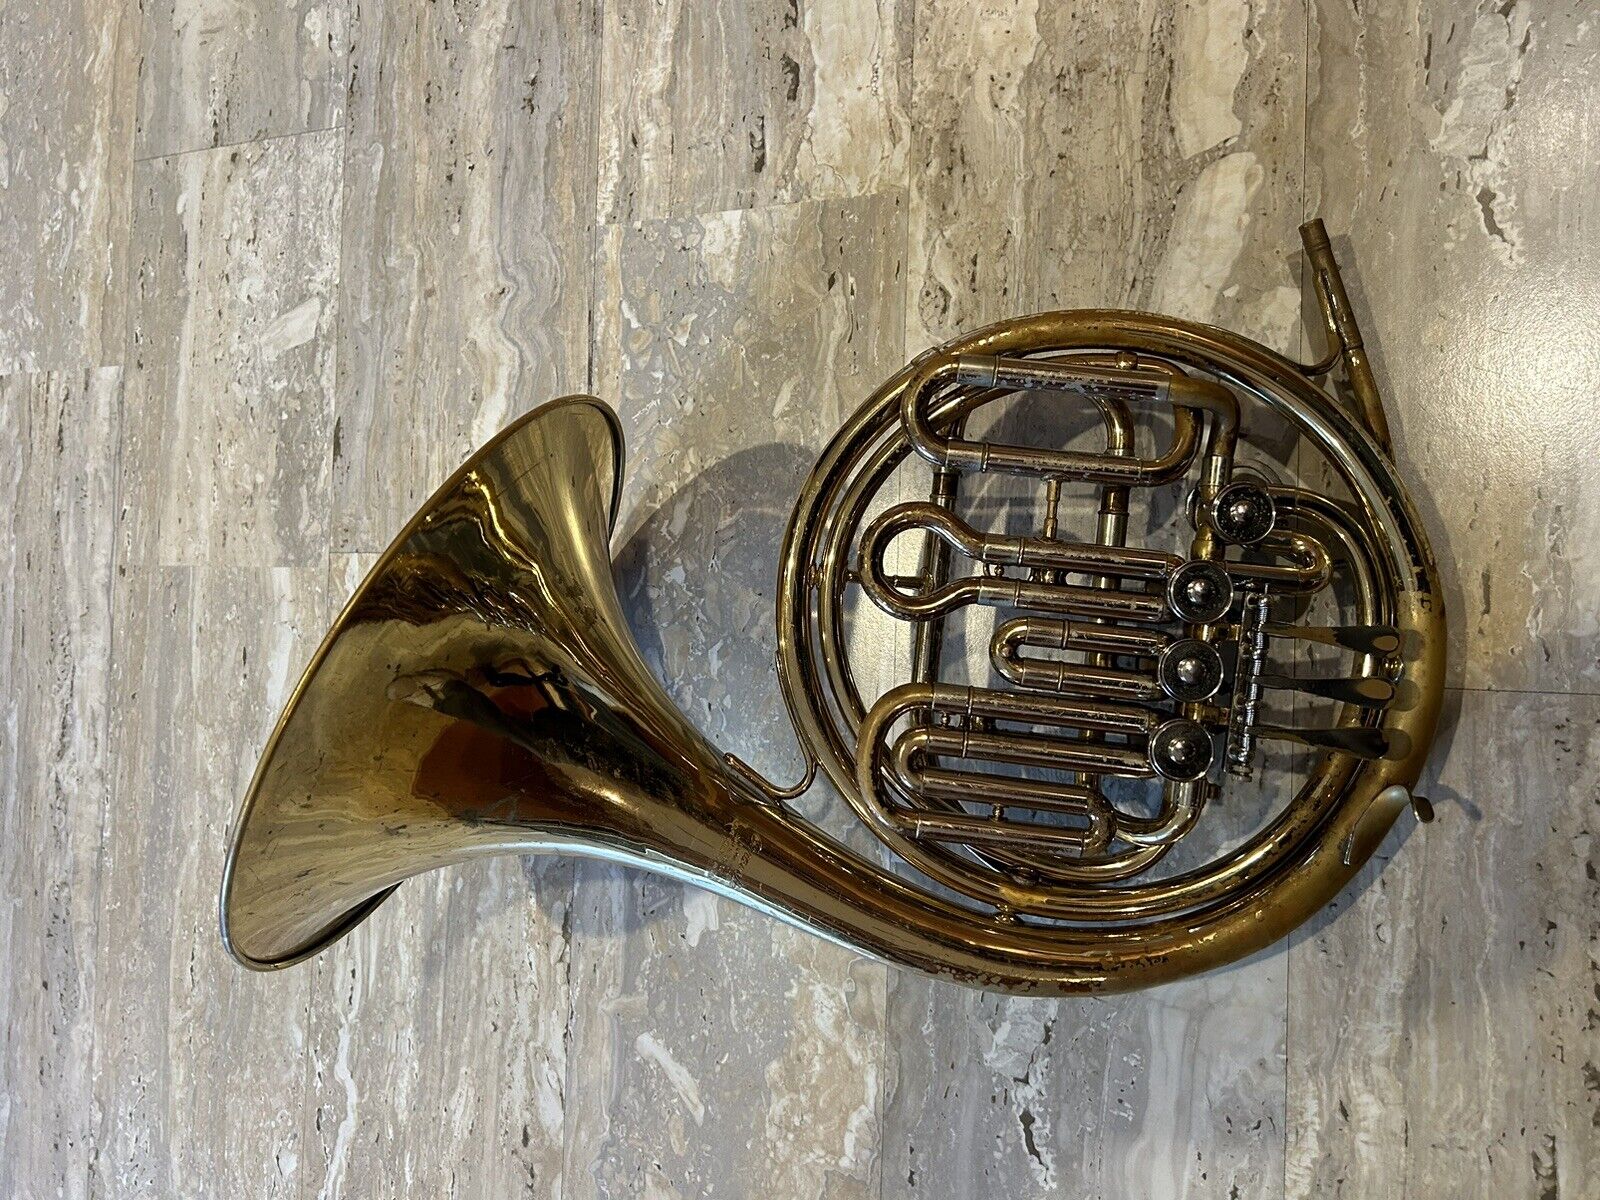 DEG (Getzen) Double B Flat To F Descant French Horn Made in the usa 1